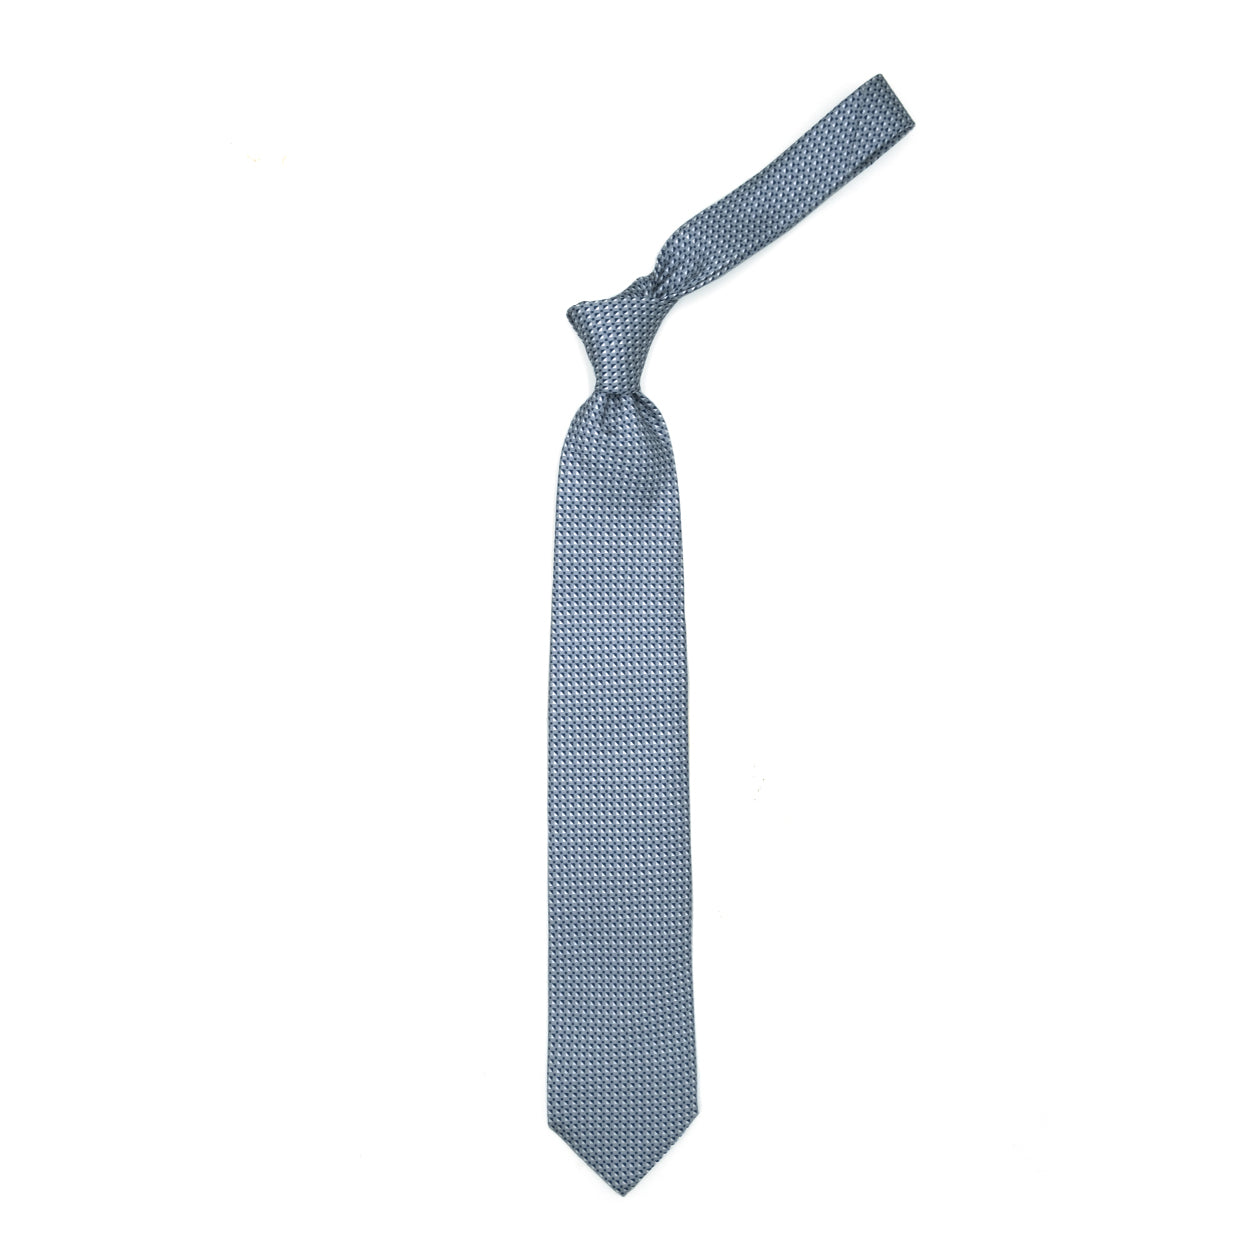 Grey tie with blue and white geometric pattern